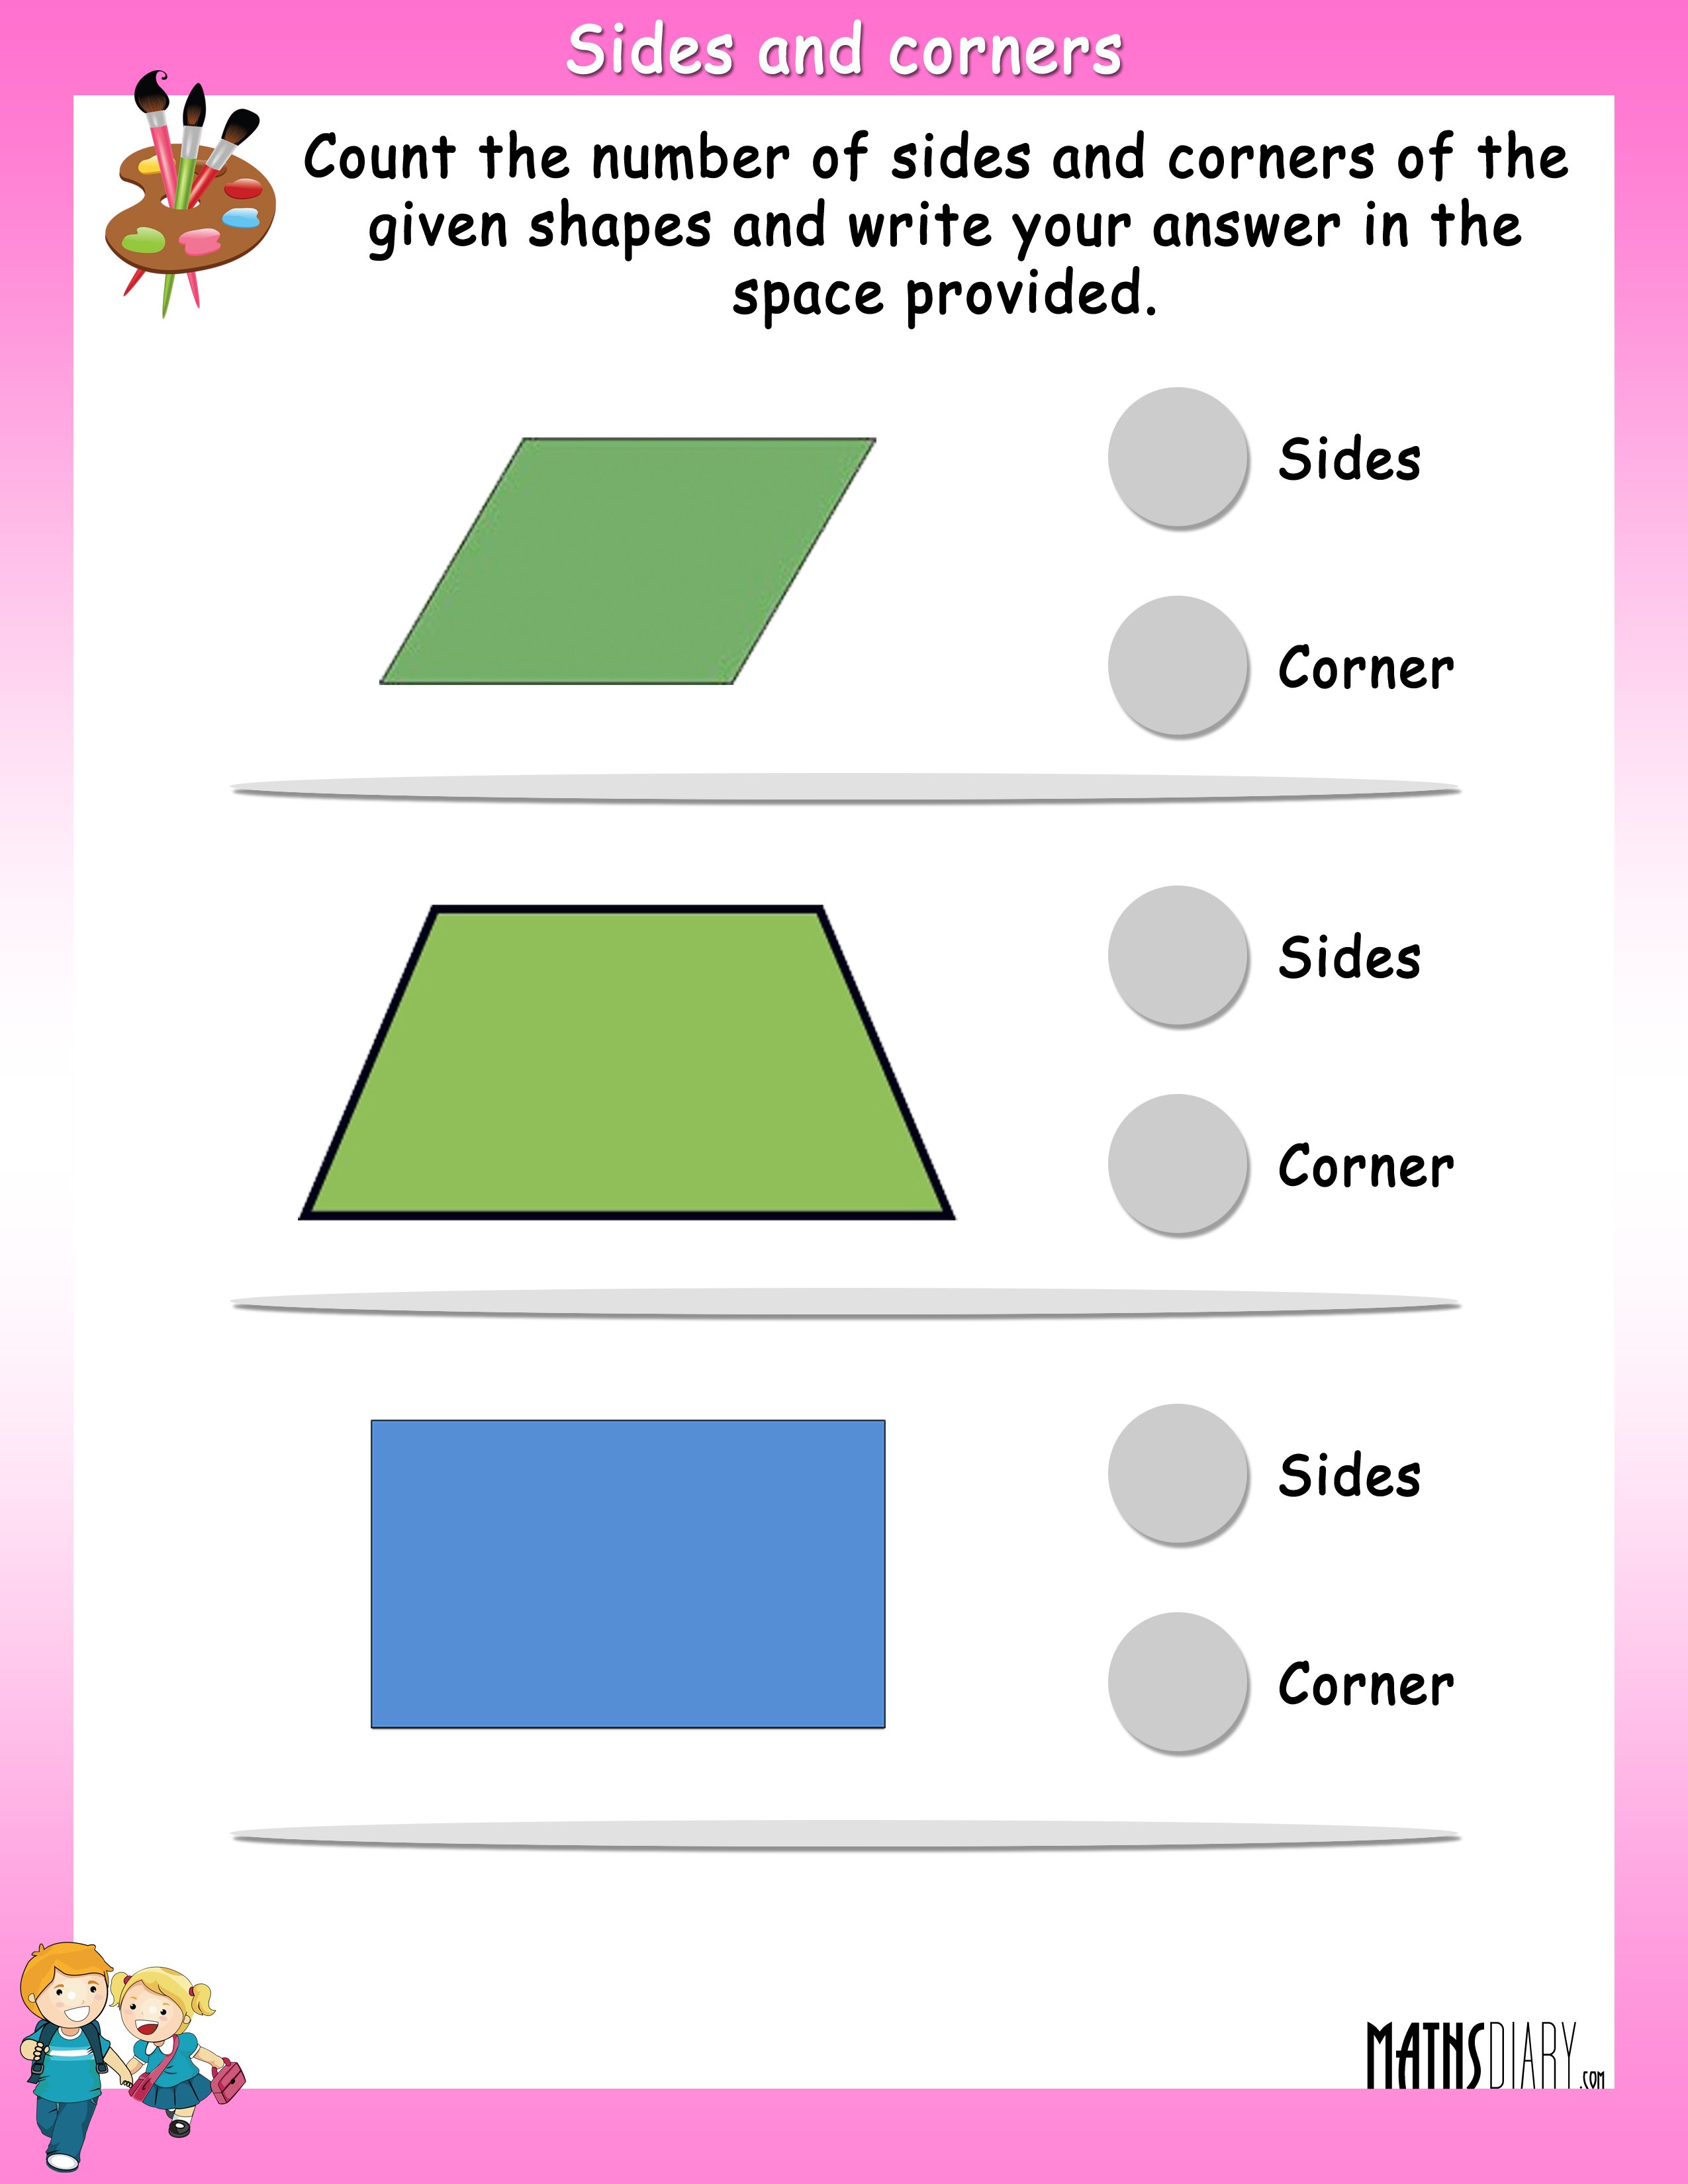 count-the-sides-and-corners-of-given-shapes-math-worksheets-mathsdiary